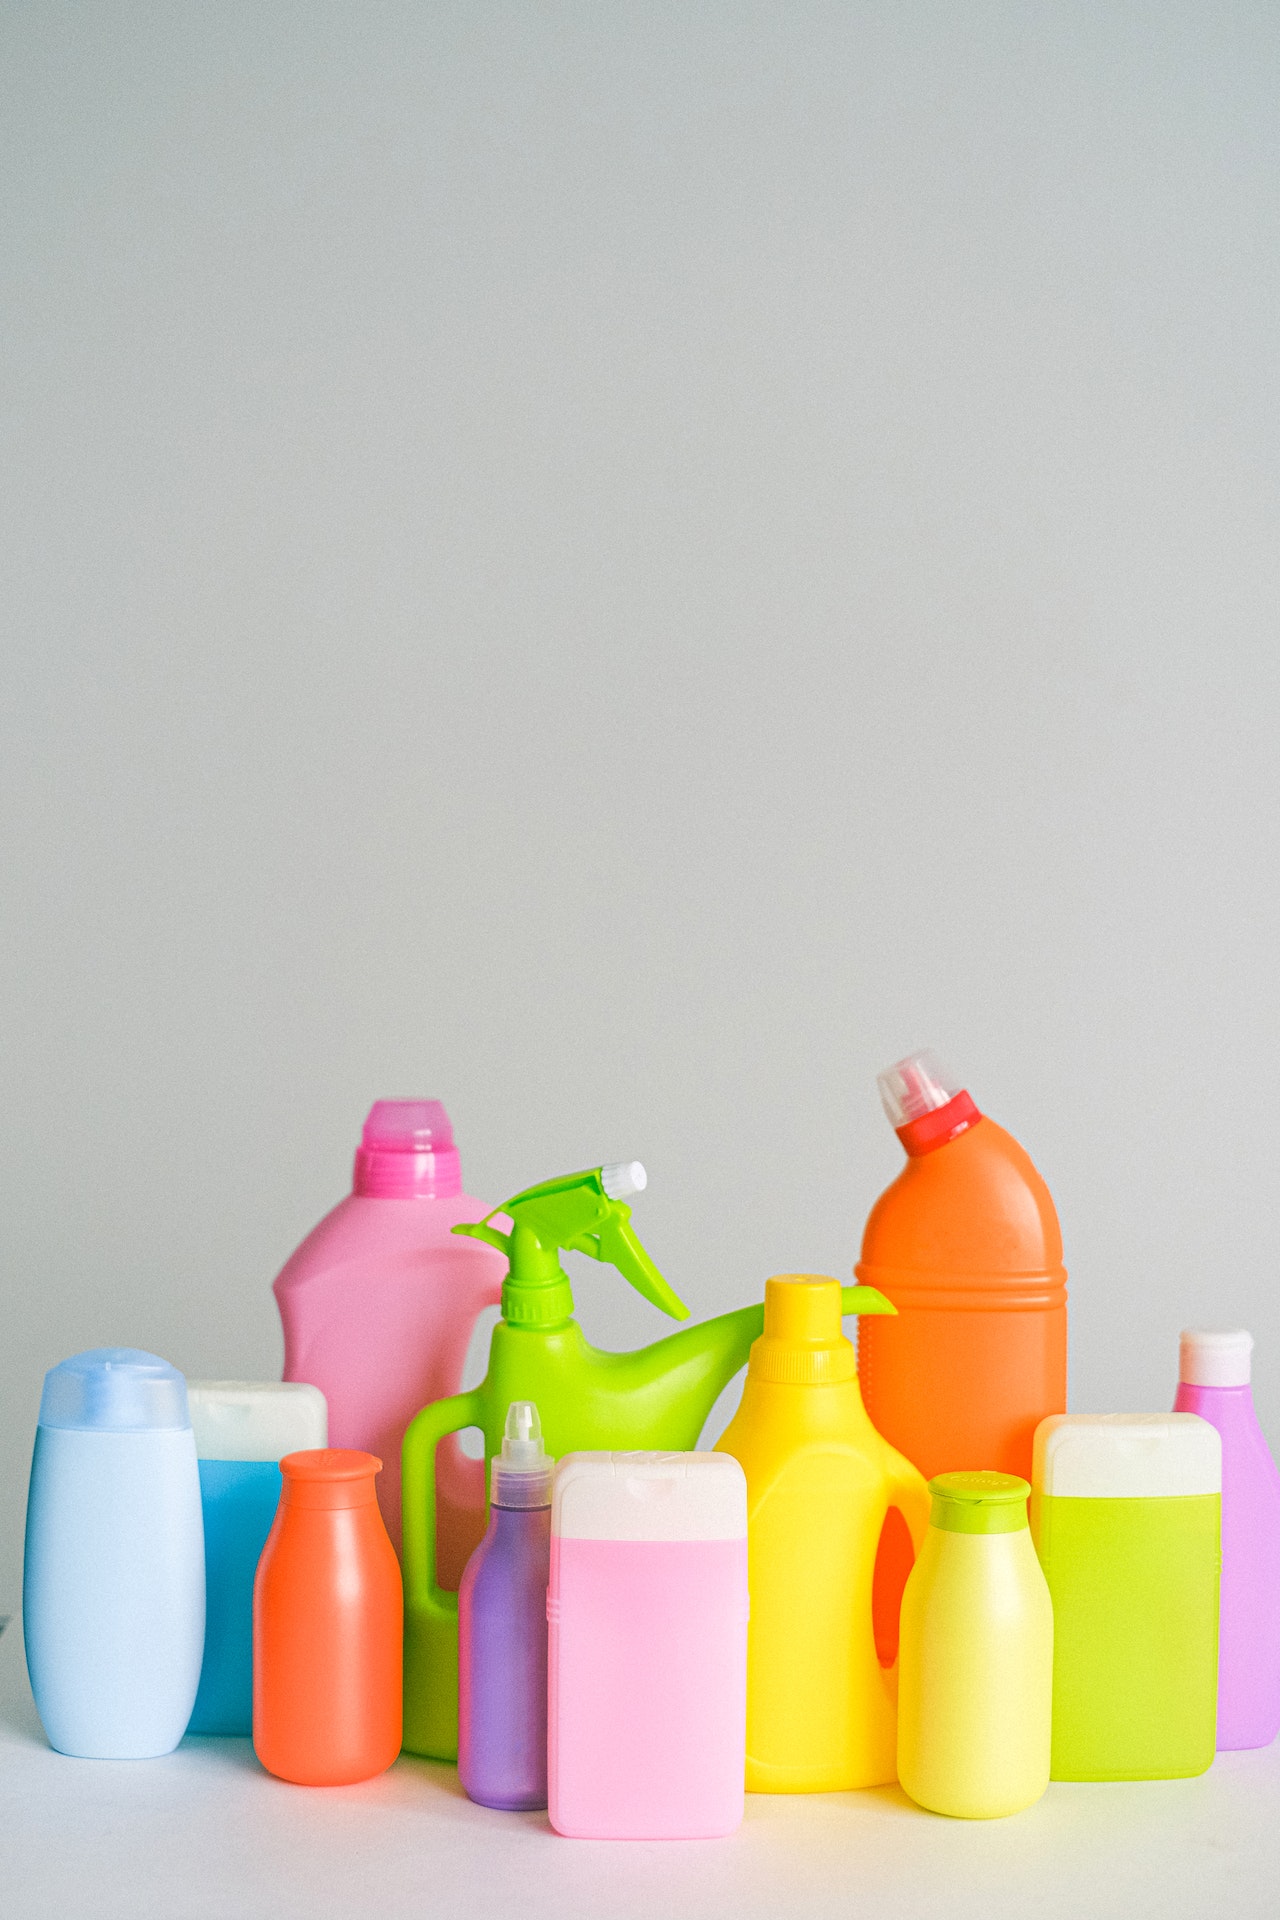 10 Must-Have Cleaning Products for Homes
